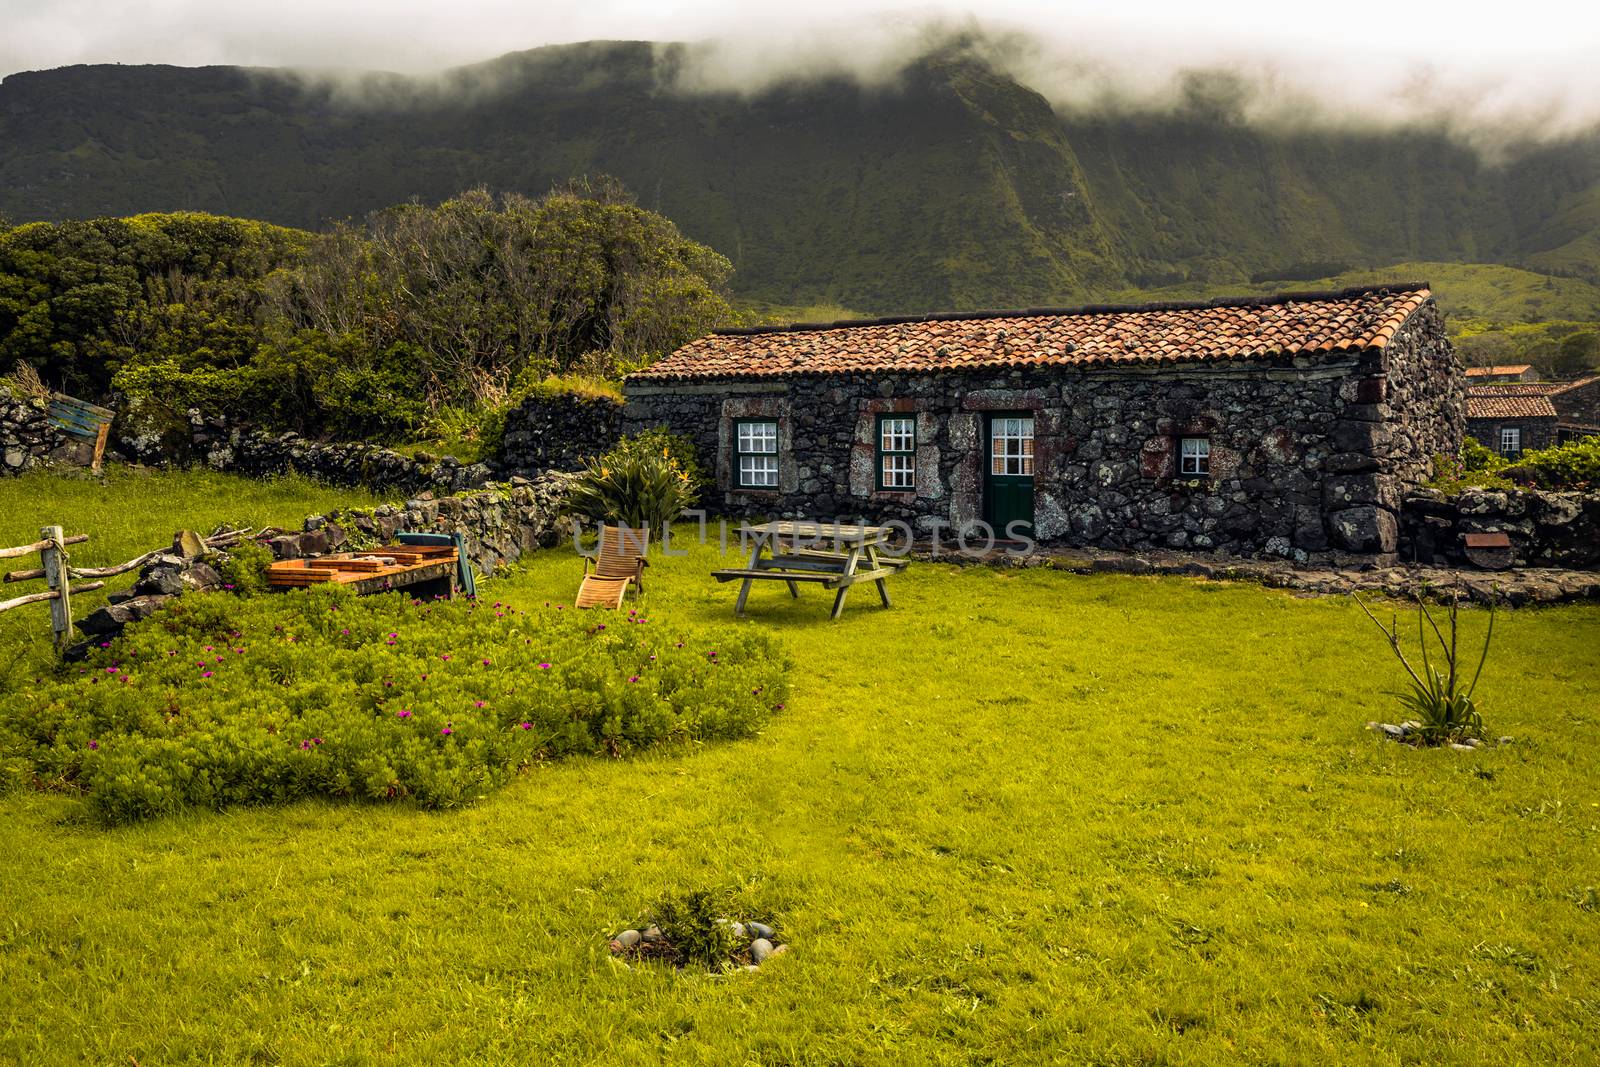 Azores typicalhouse by Iko